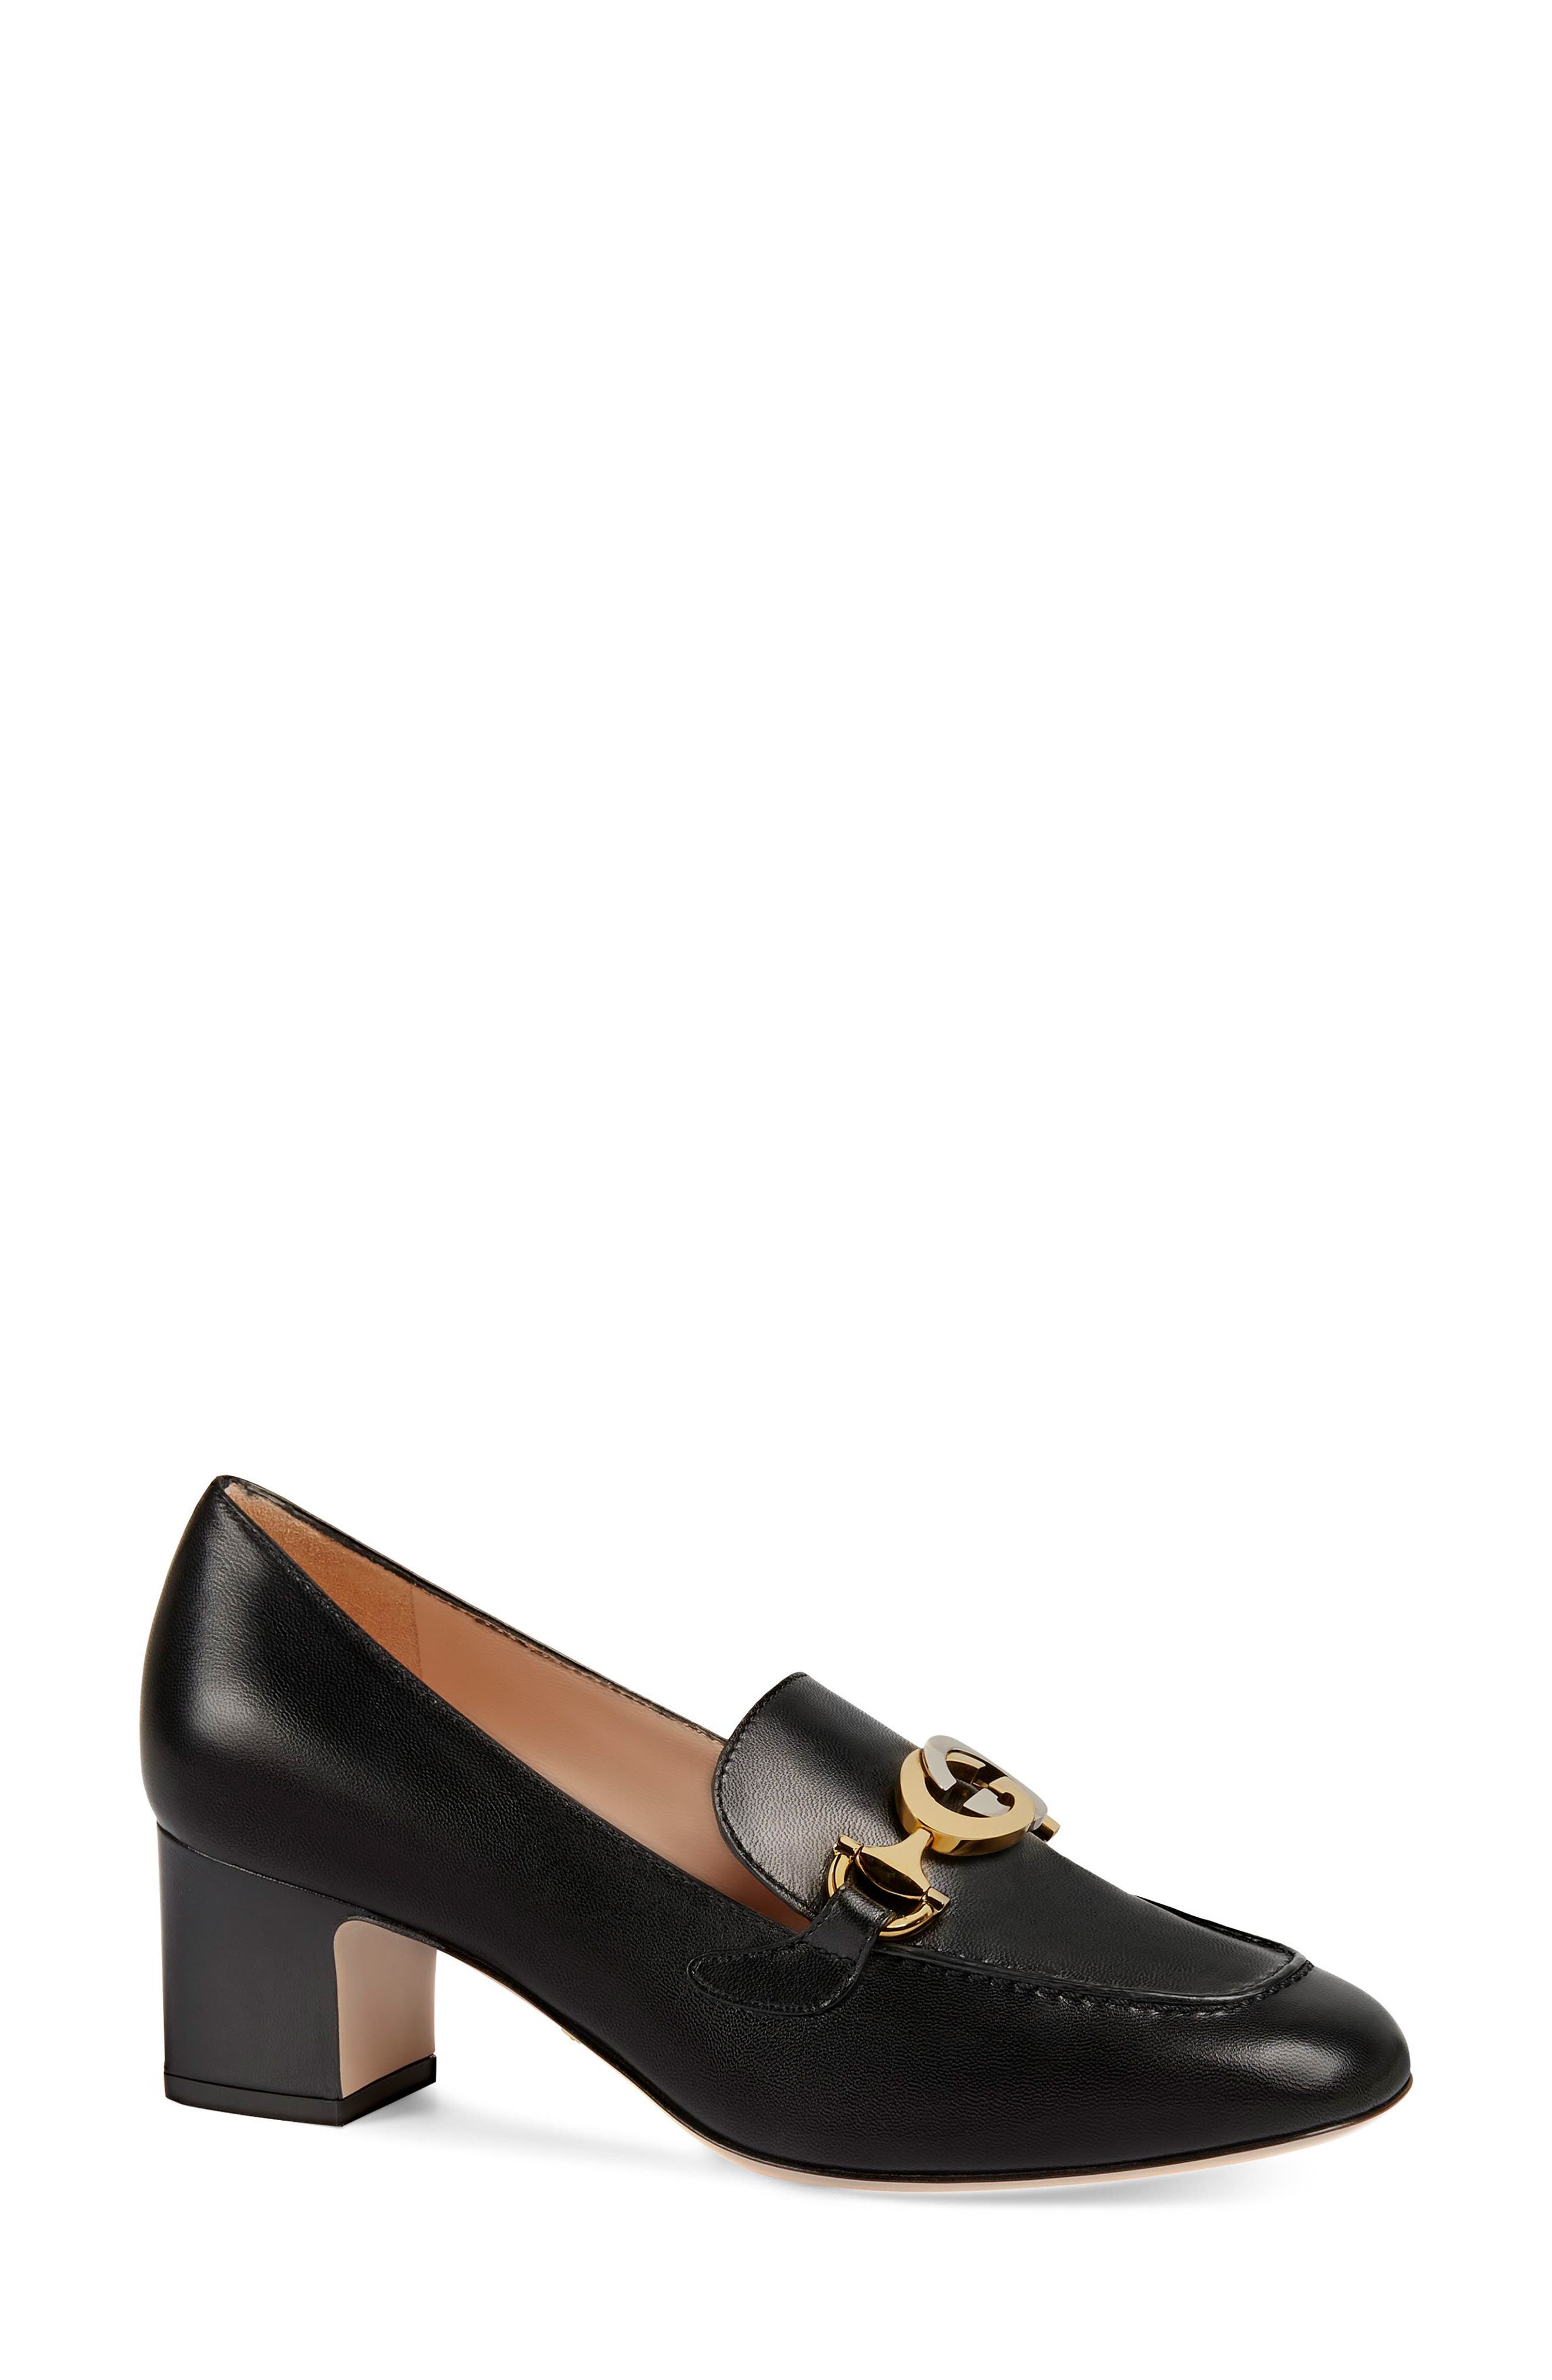 gucci black shoes for women